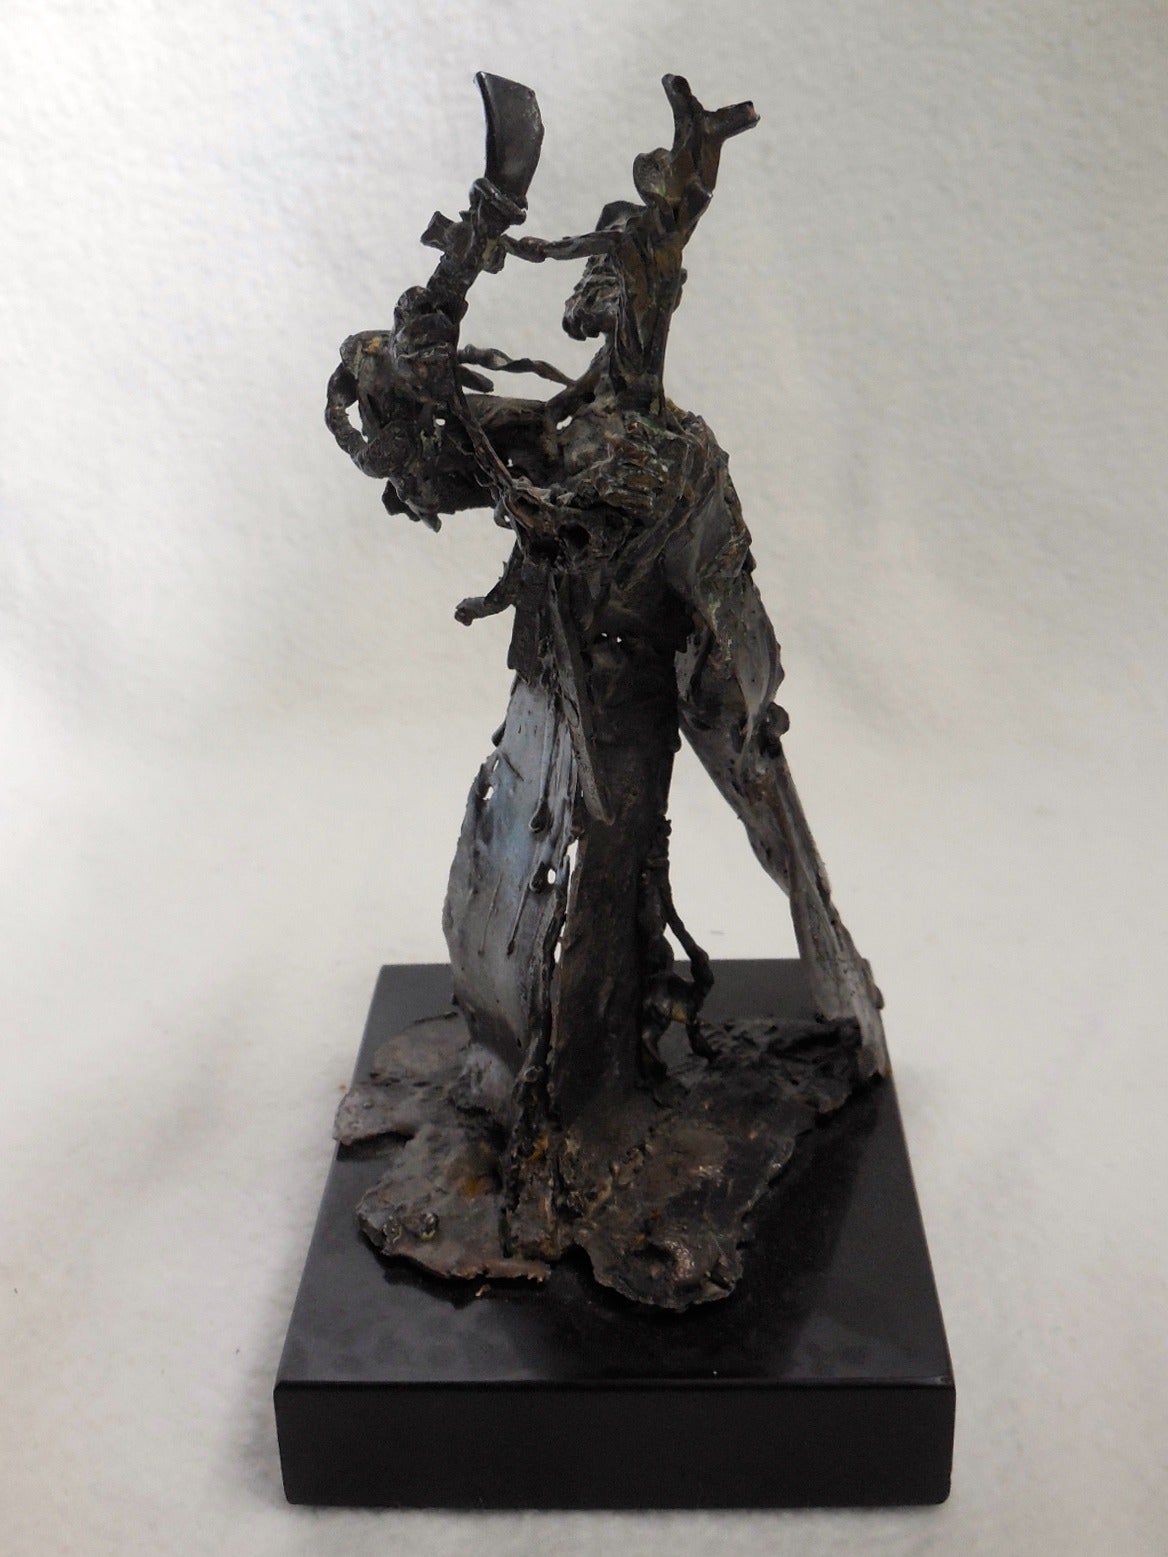 KIng David with Harp - Silver Figurative Sculpture by Hana Geber